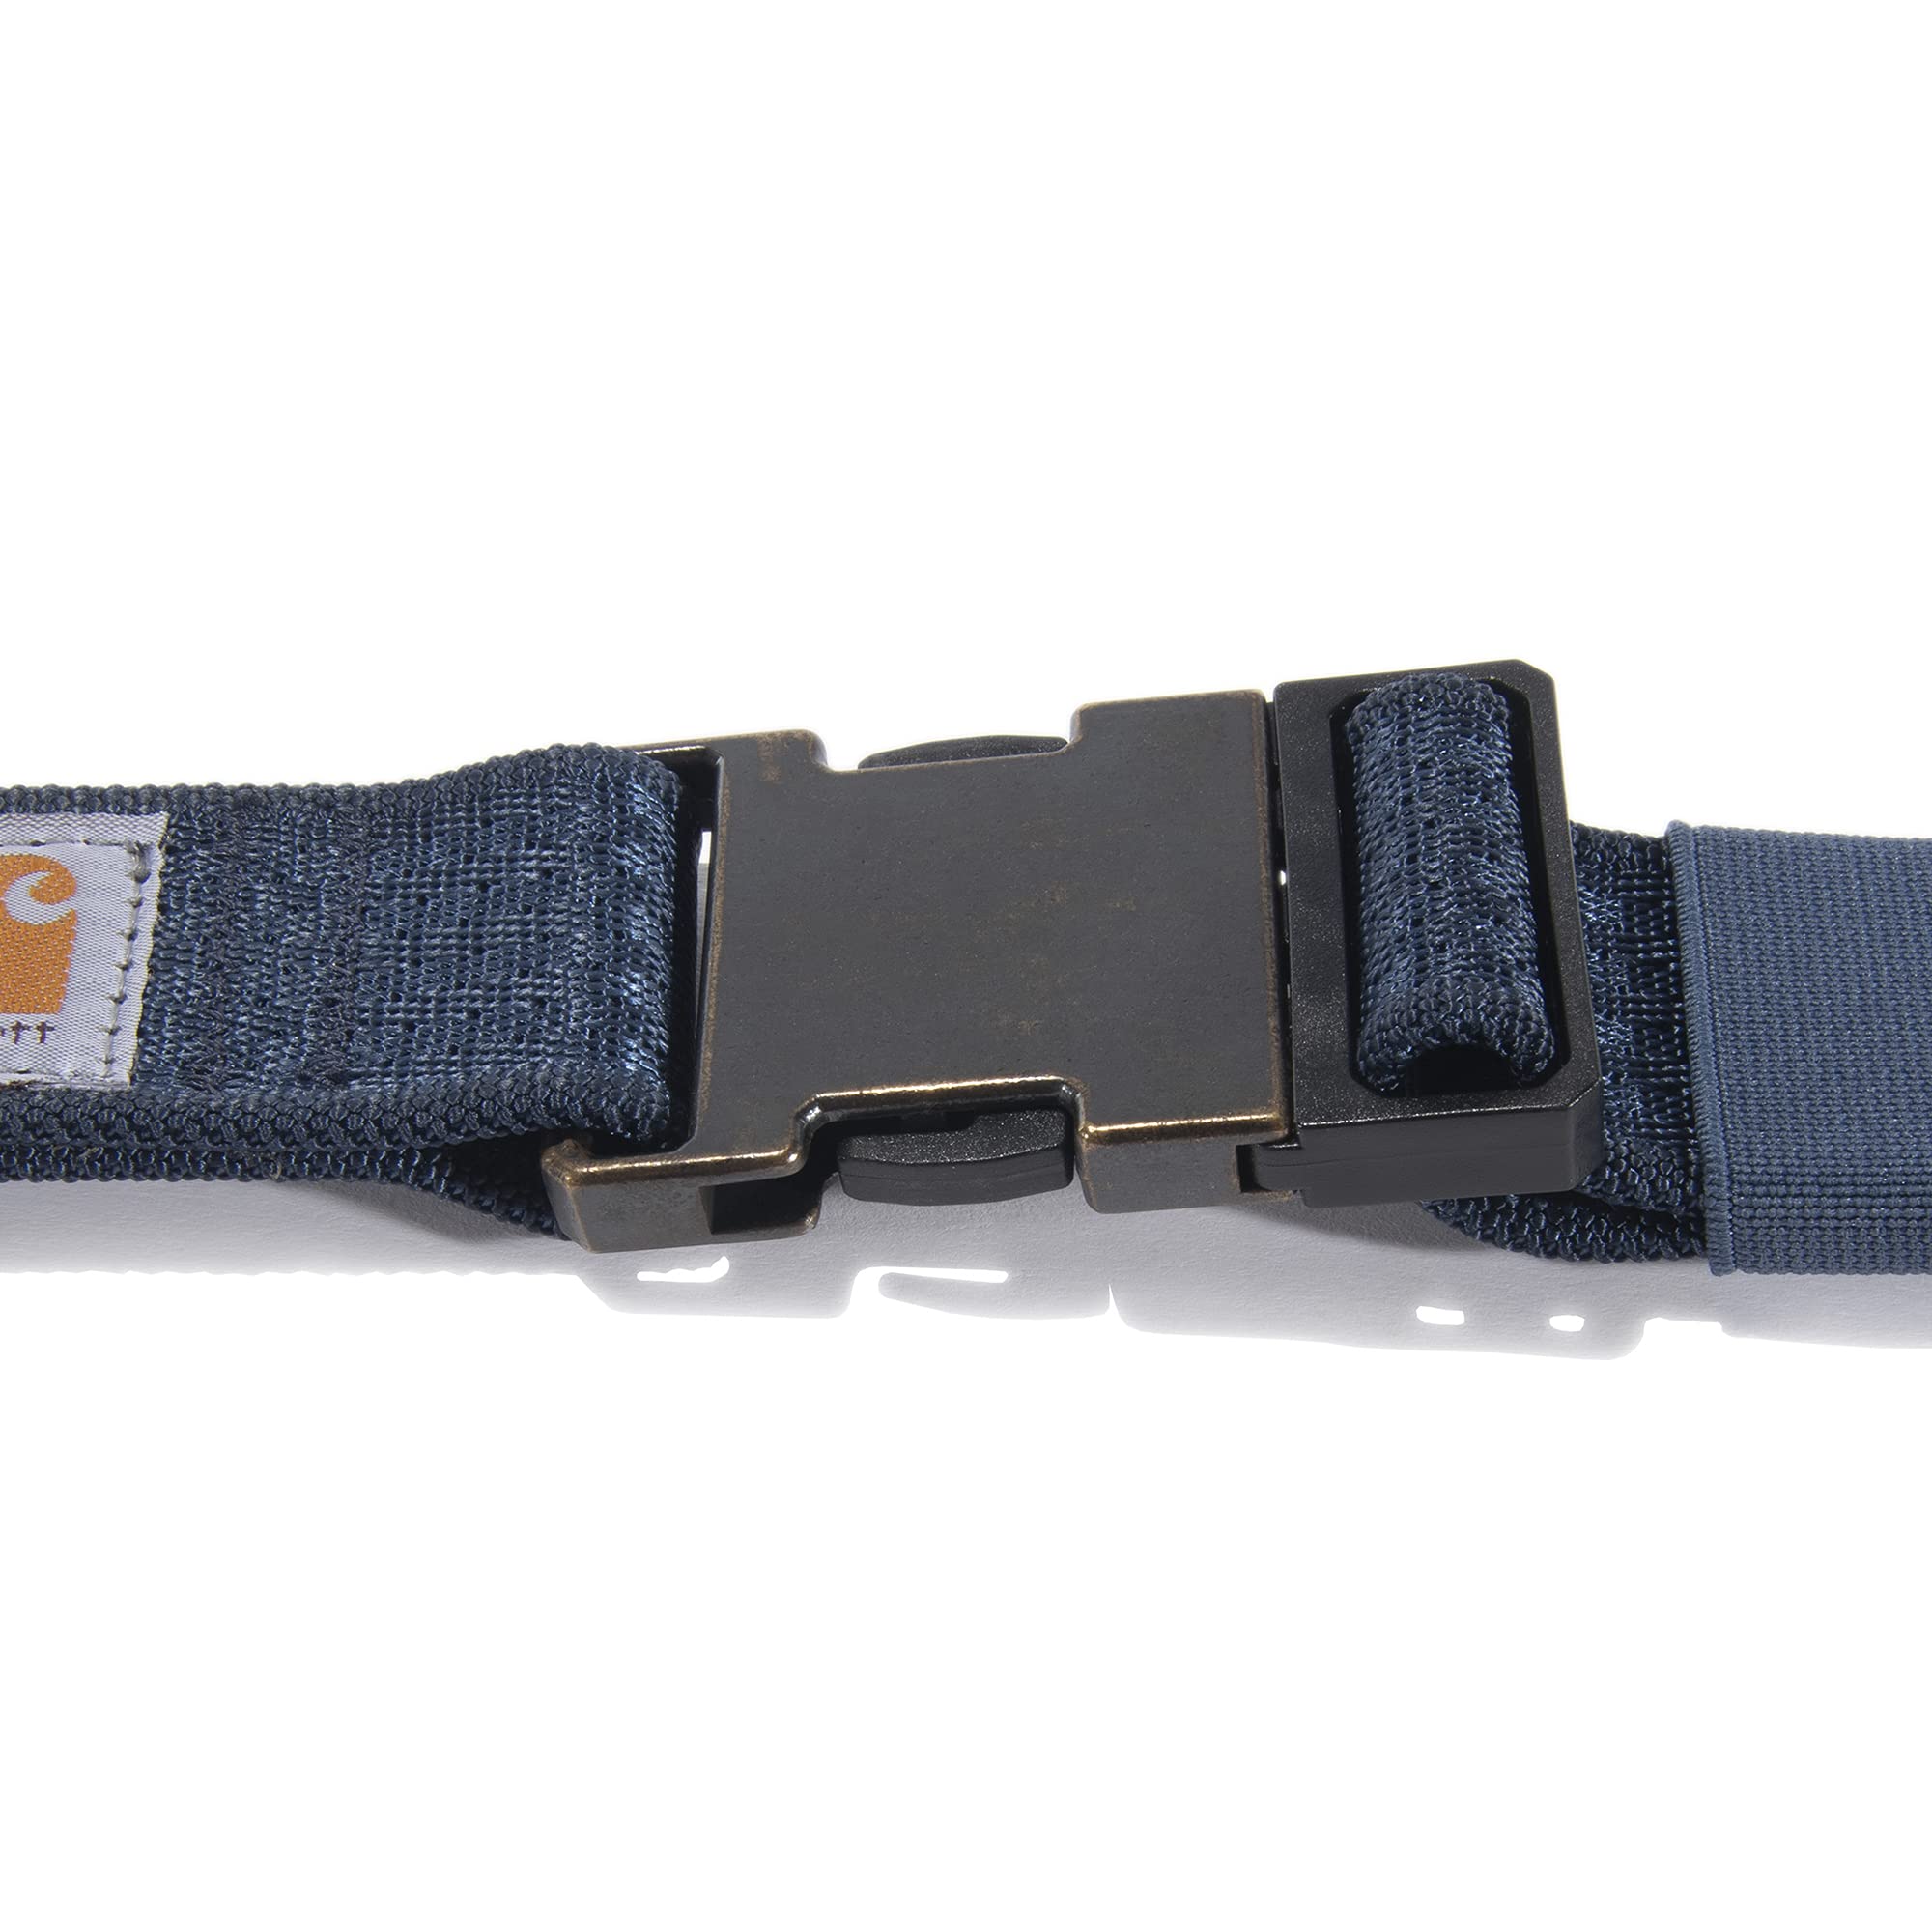 Carhartt Men's Casual Rugged Belts, Available in Multiple Styles, Colors & Sizes